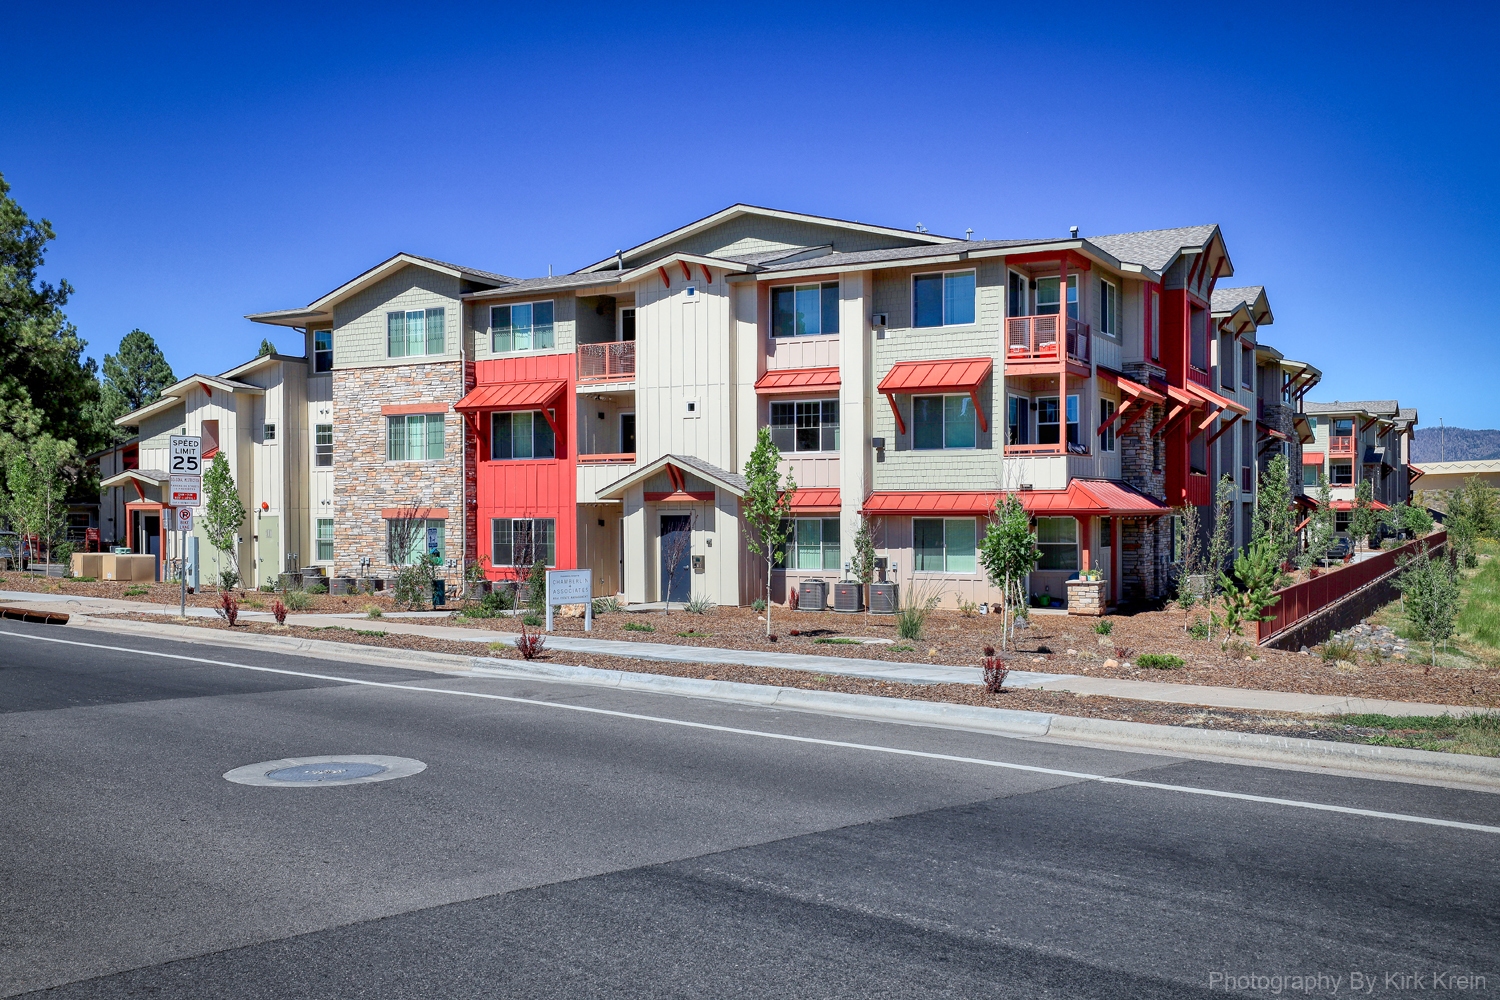 Trailside-Apartments-Flagstaff-AZ-Construction-Builder-Image-by-Kirk-Krein Architectural and Commercial Real Estate Photography by Kirk Krein, Phoenix, AZ - East Valley and Beyond!